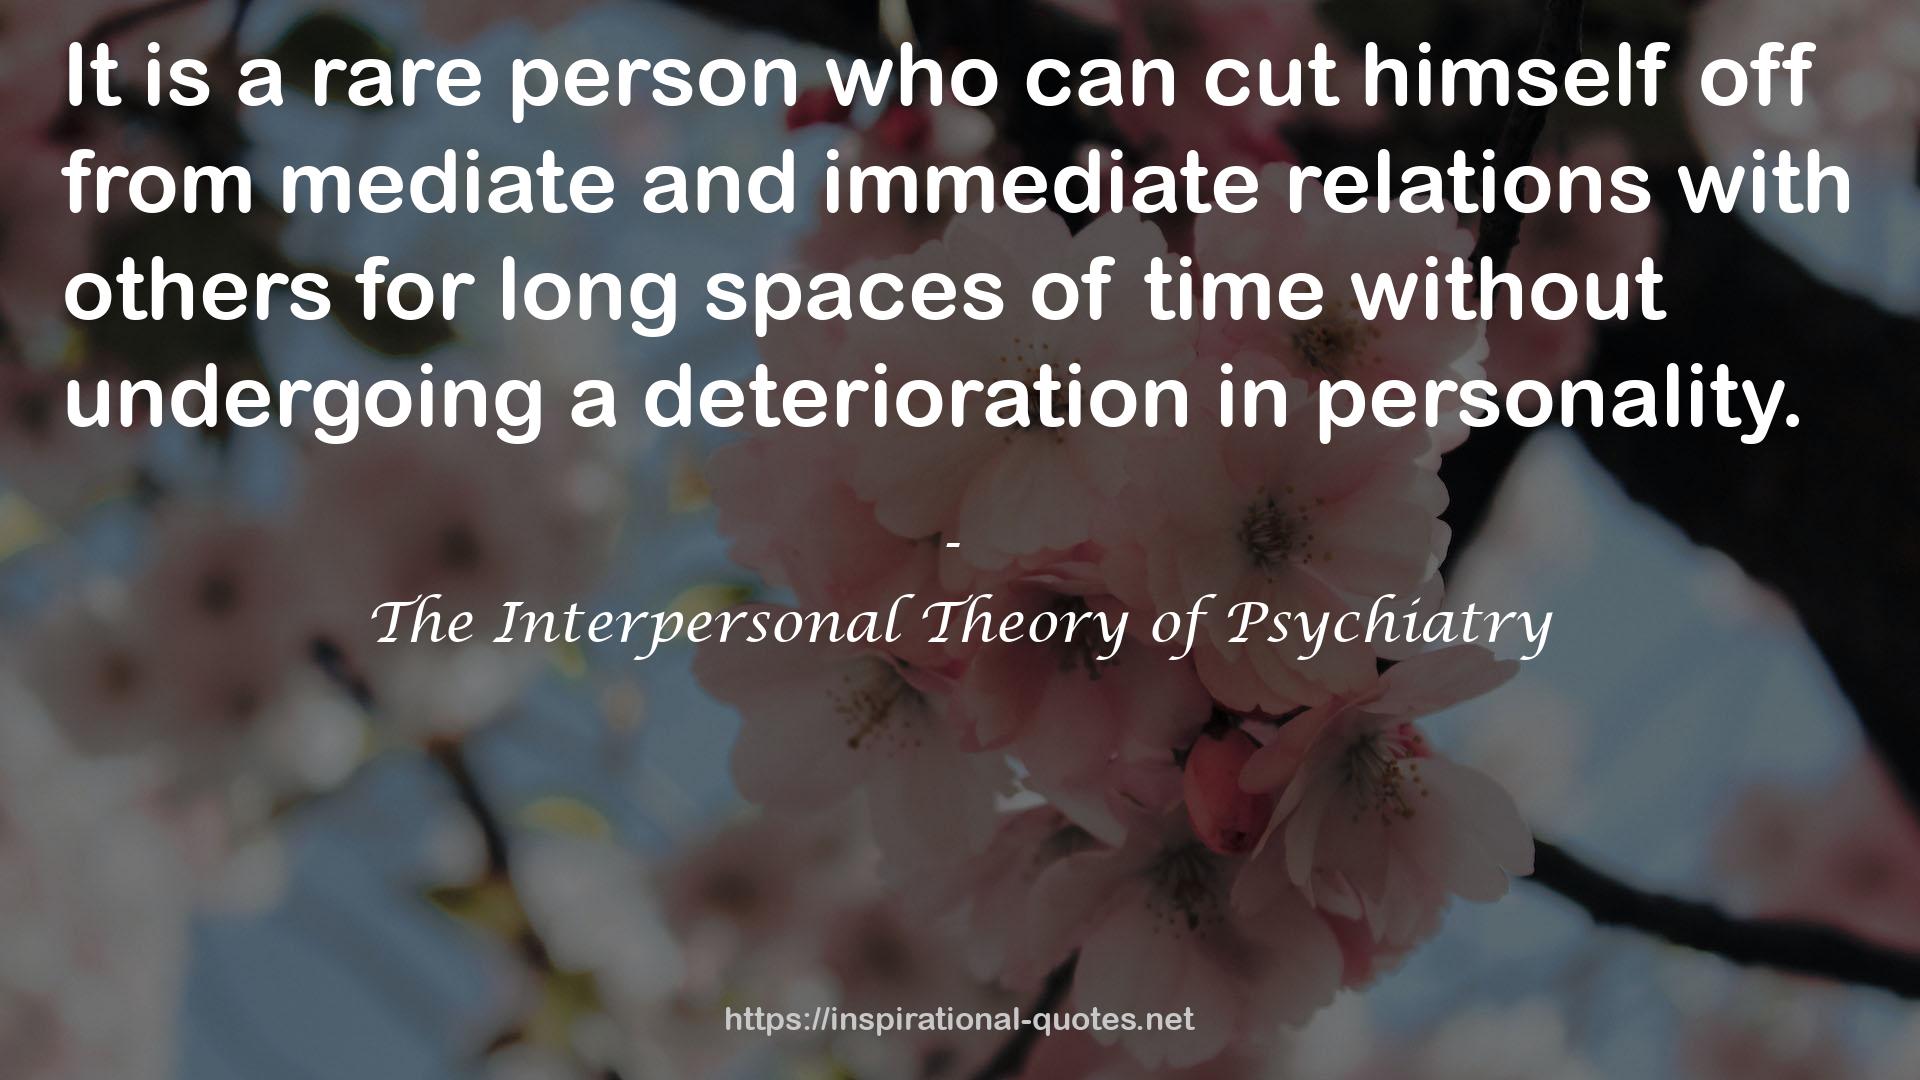 The Interpersonal Theory of Psychiatry QUOTES